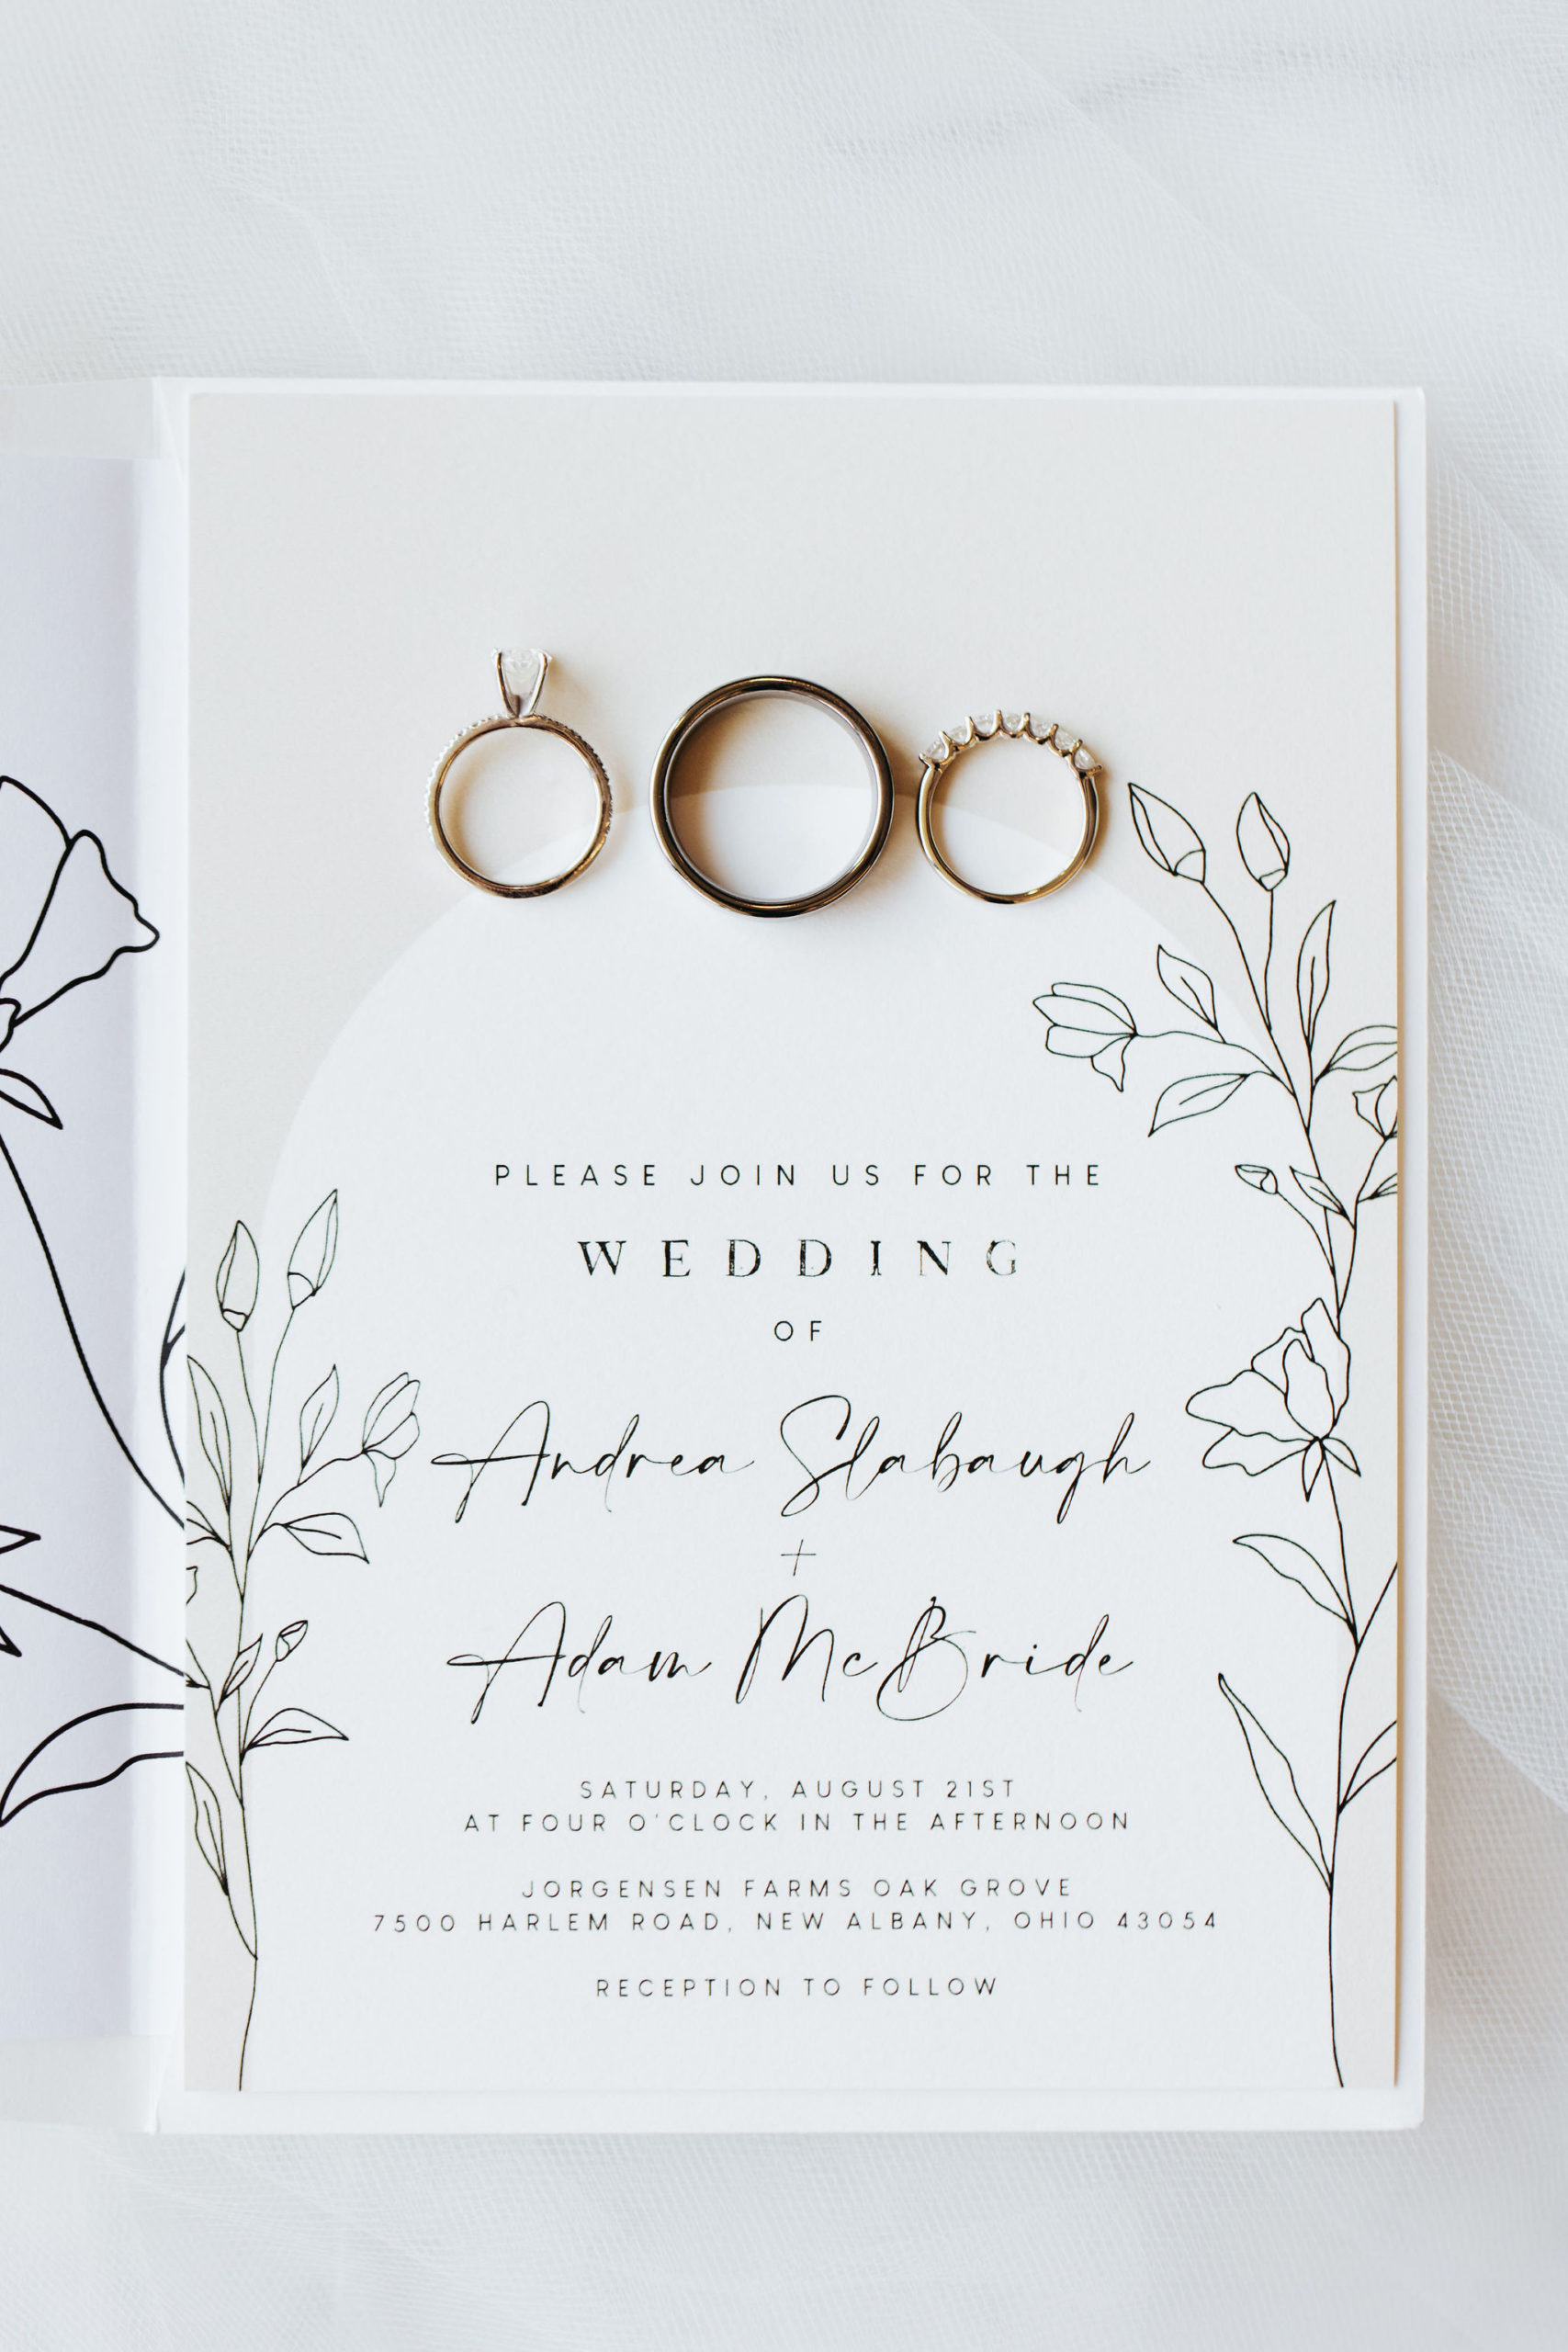 wedding invites and ring details